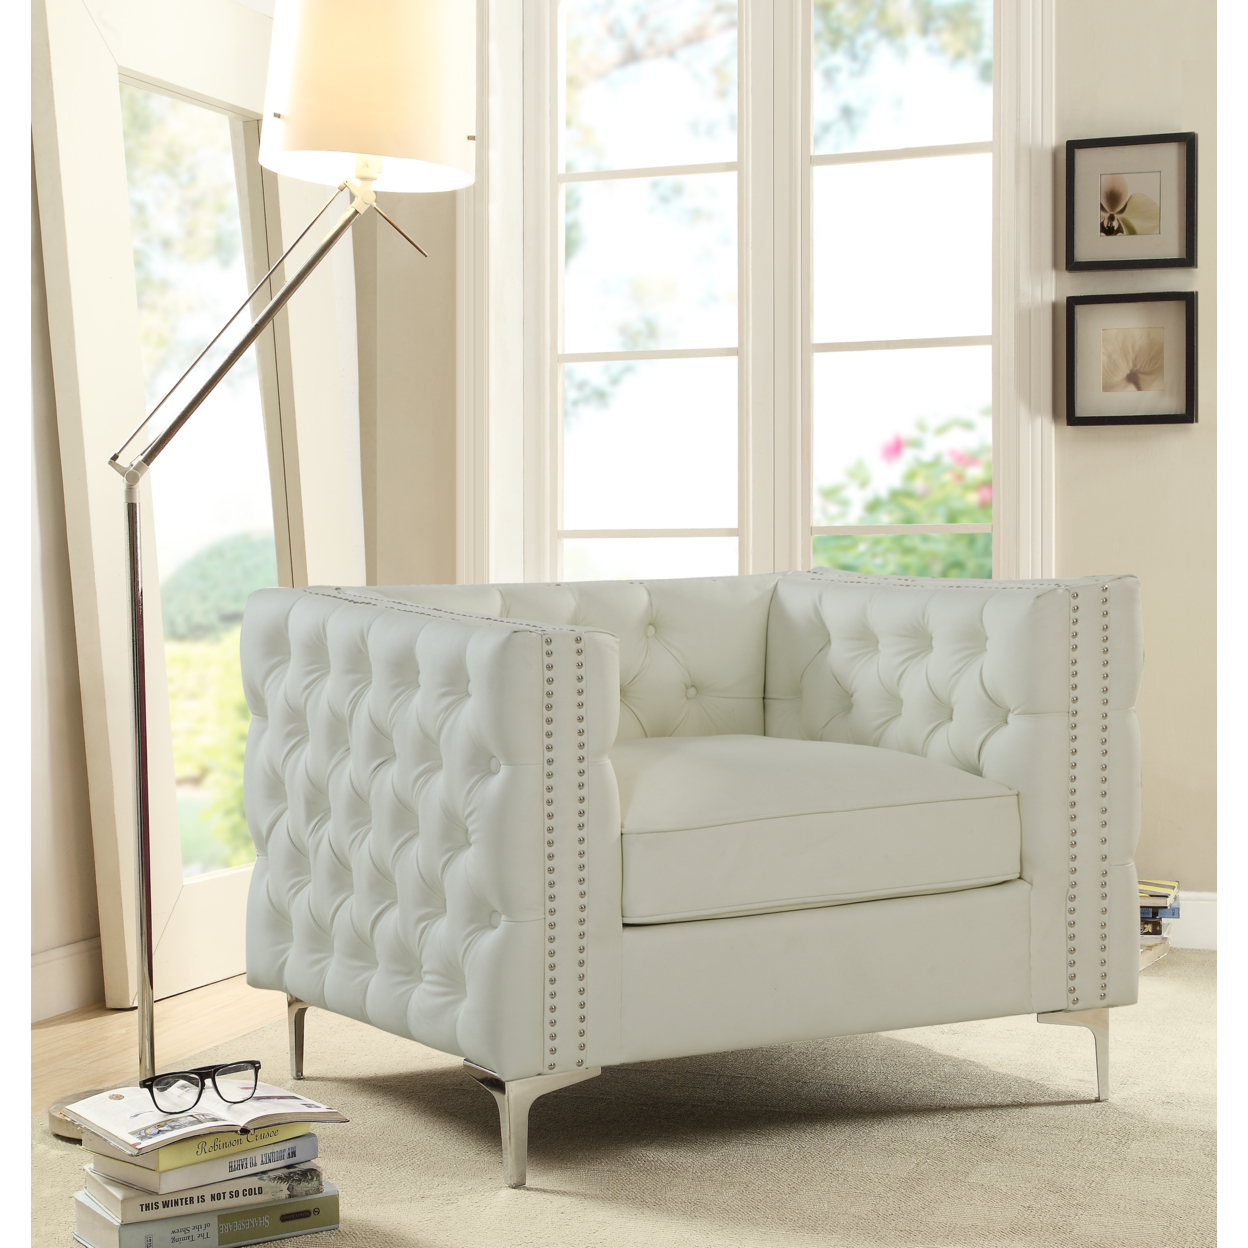 Picasso PU Leather Modern Contemporary Button Tufted With Silver Nailhead Trim Silvertone Metal Y-leg Club Chair - Cream